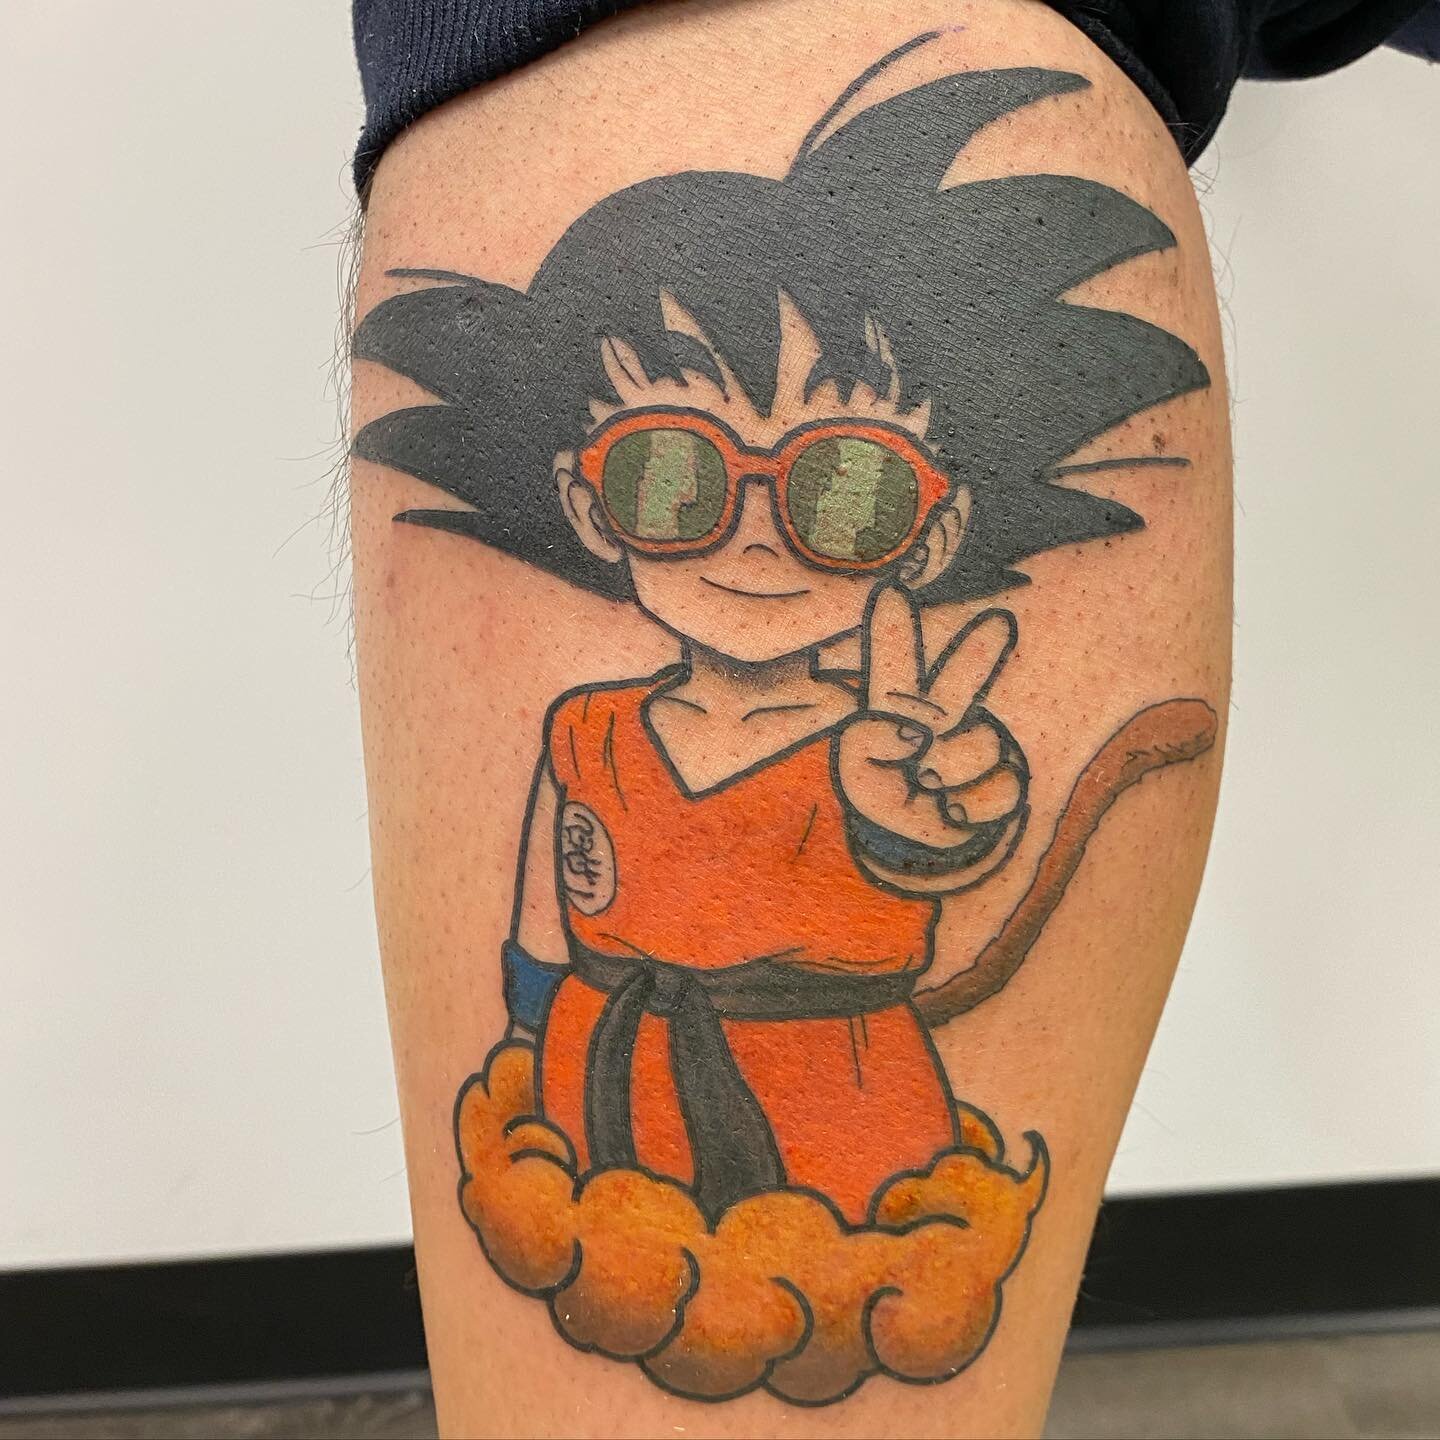 &ldquo;Let&rsquo;s give it everything we&rsquo;ve got&rdquo; - Goku #theedgetattoo #theedgetattooct #starbritecolors #manchesterct #animetattoo #videogames #cttattooartists #tattoos #inkedup #drawing #videogametatts #tattooing #tattoo #art #anime #ma